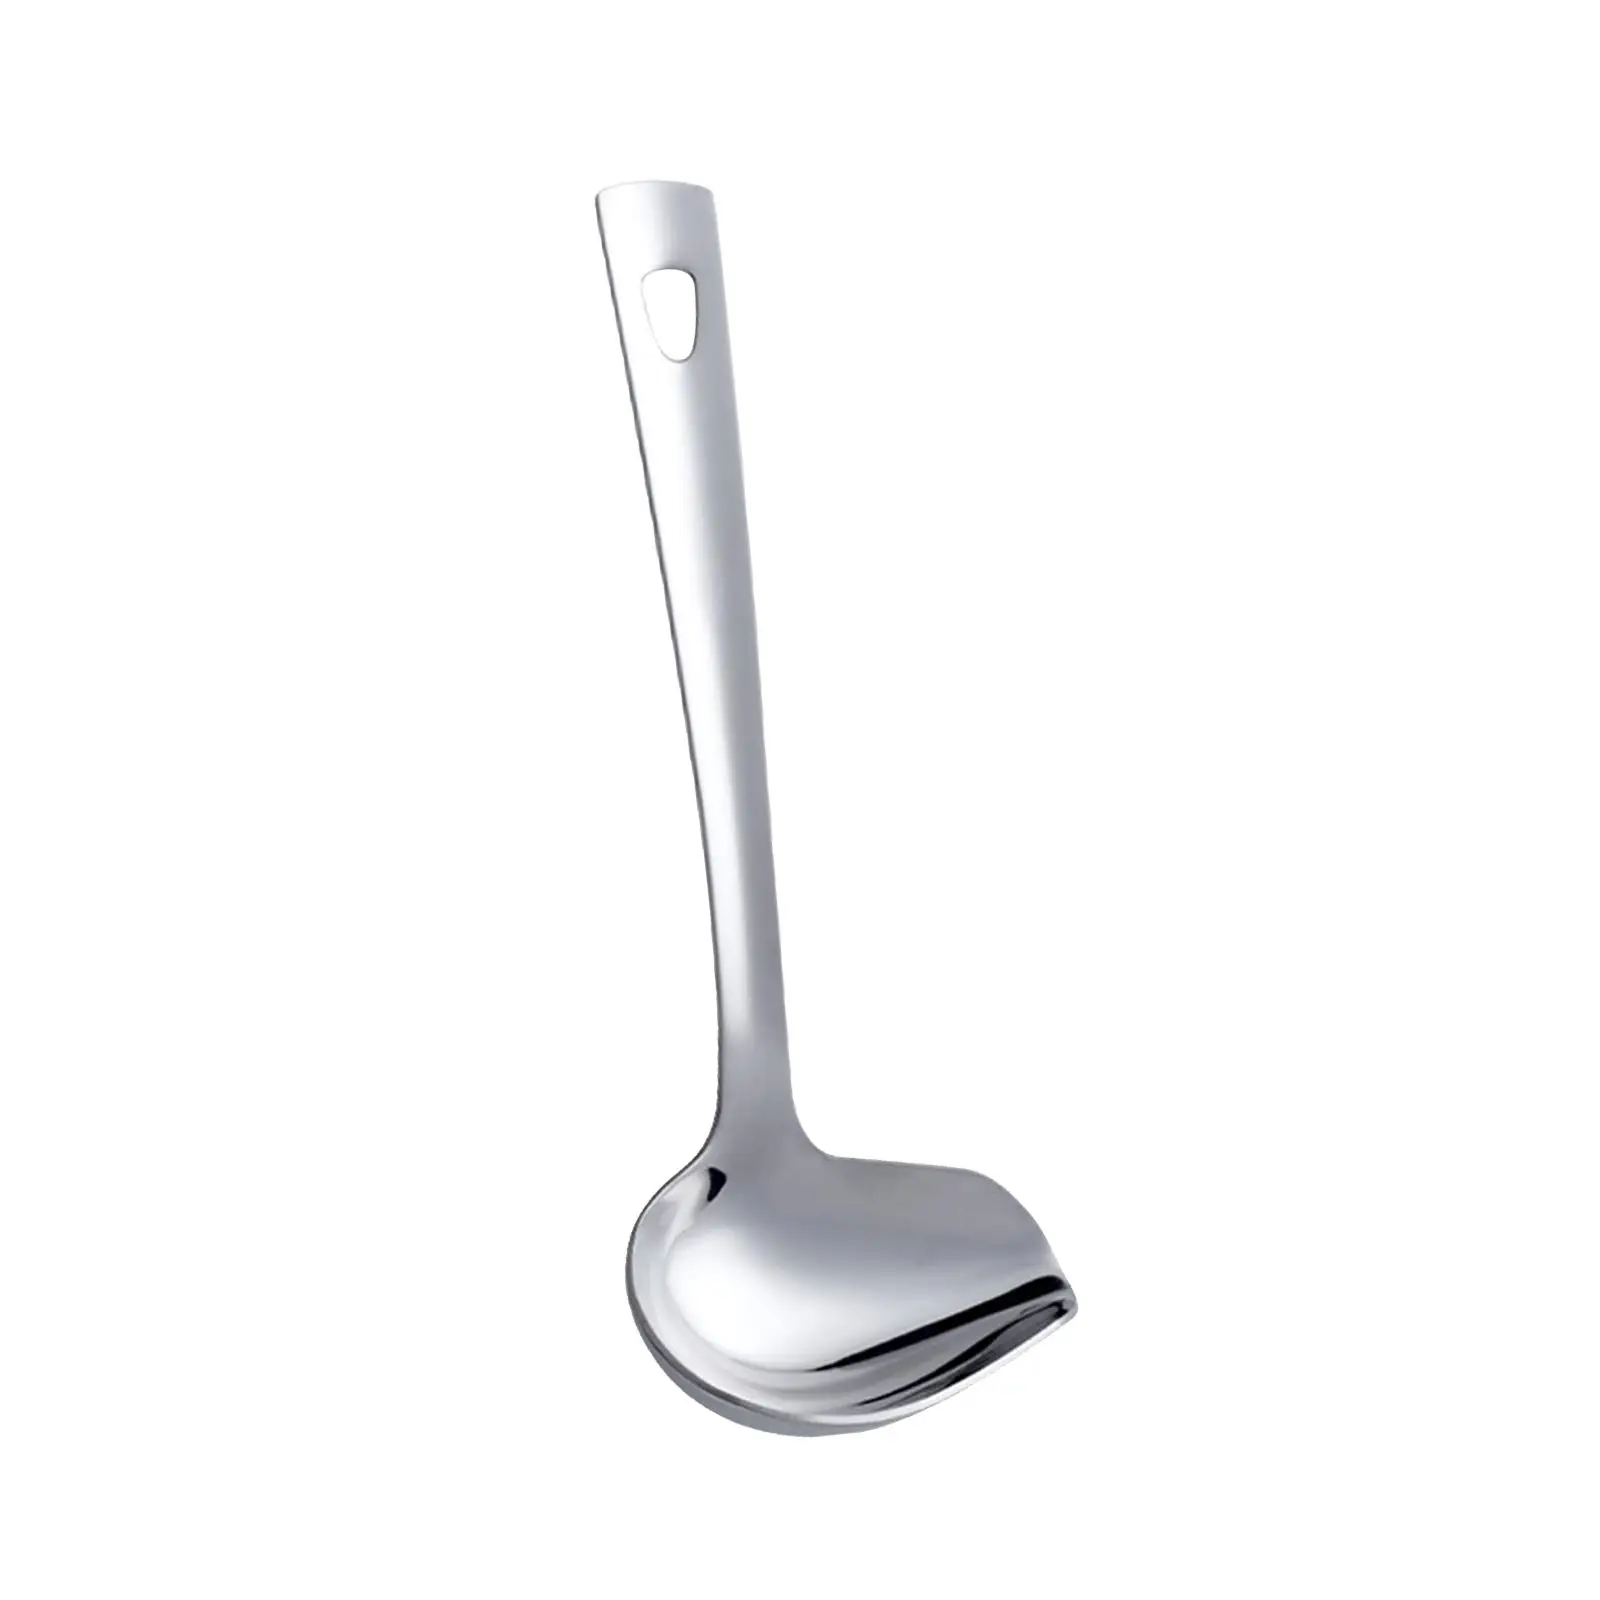 Sauce Ladle Small Ladle with Spout Kitchen Utensil Drizzle Spoon Gravy Ladle Stainless Steel for Chocolates Gravies Sauces